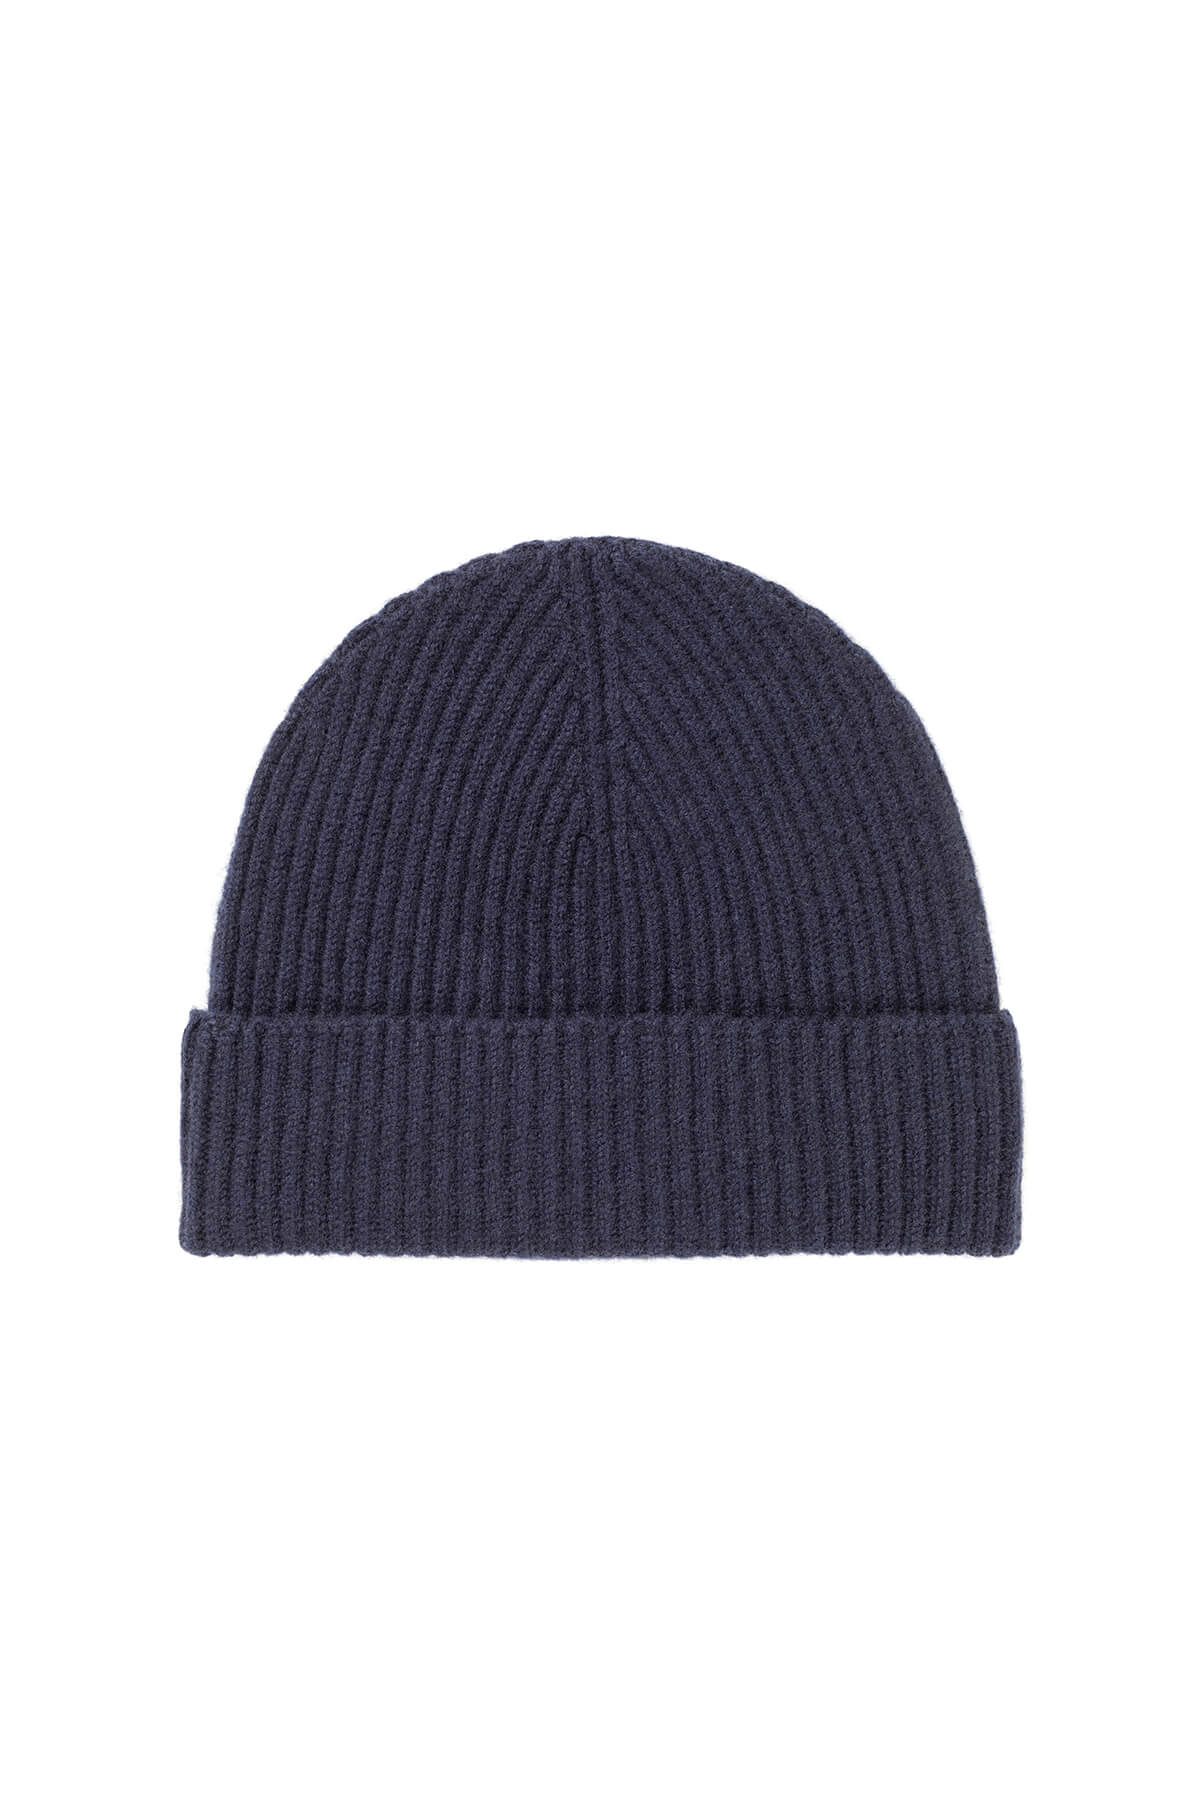 Johnstons of Elgin’s Ribbed Cashmere Beanie Giftset in Navy on a grey background AW23GIFTSET6B